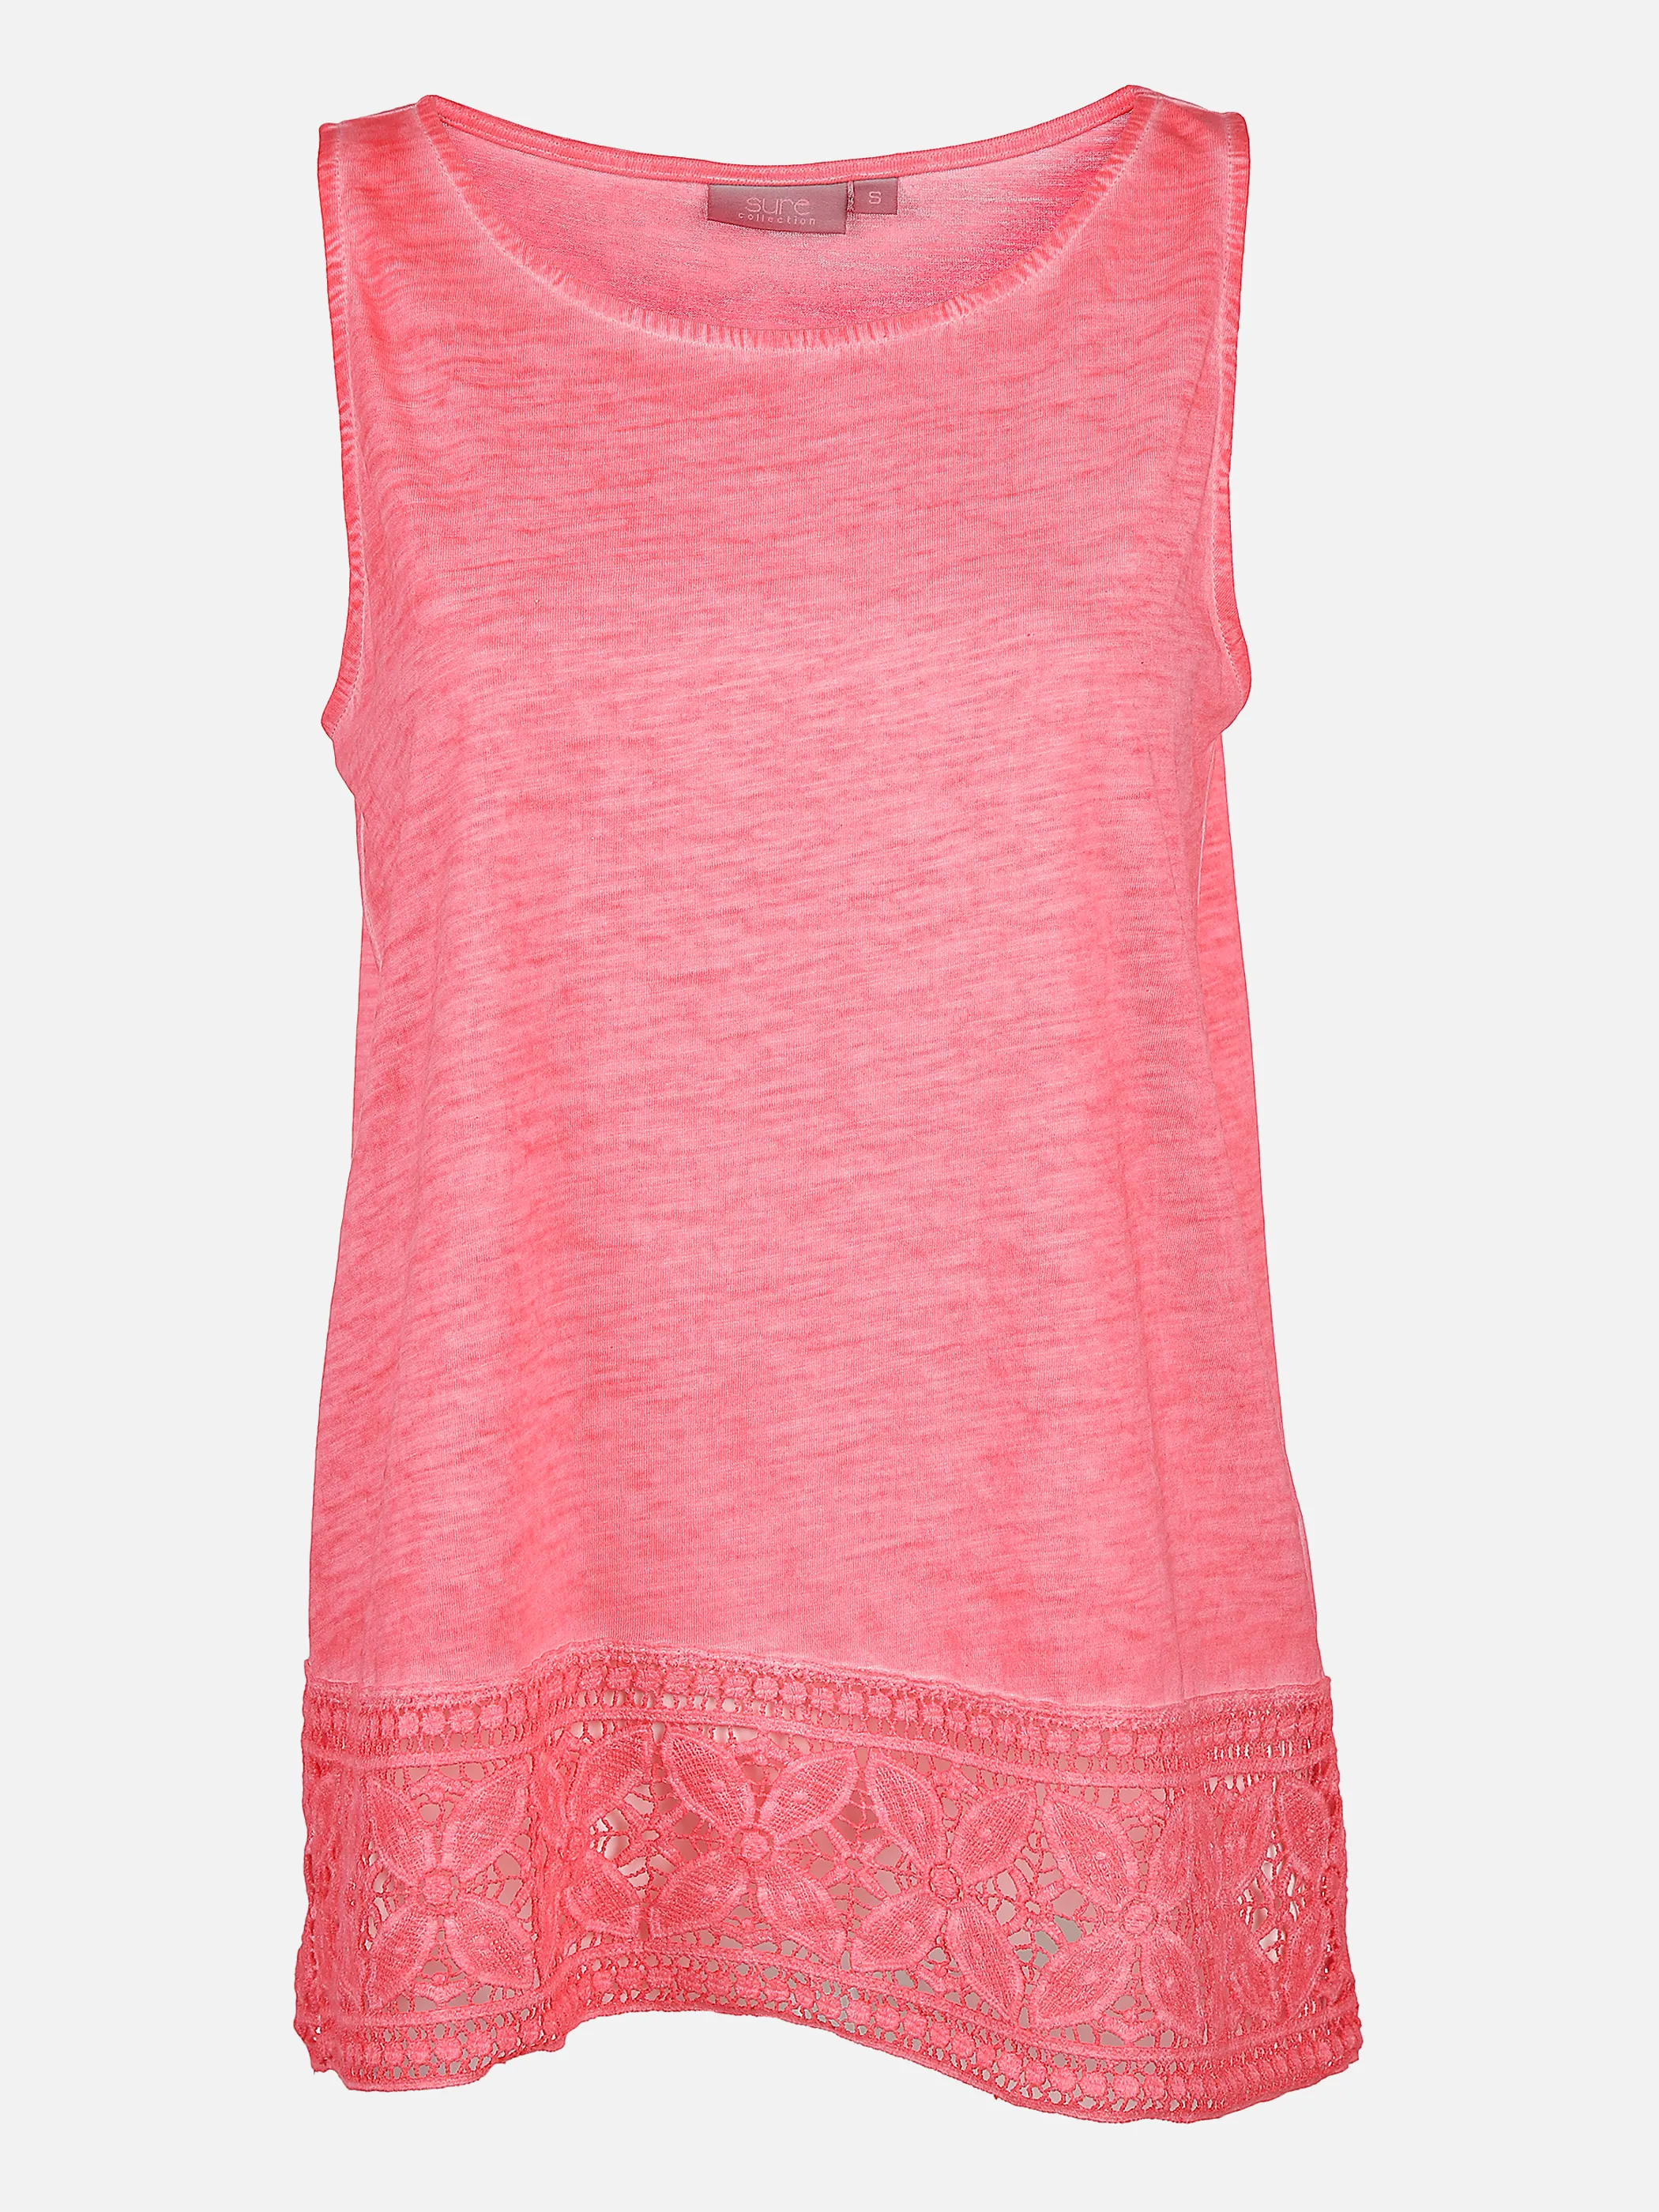 SURE Collection Da-Tank Top mit Spitze Rot 810382 STRAWBERRY 1